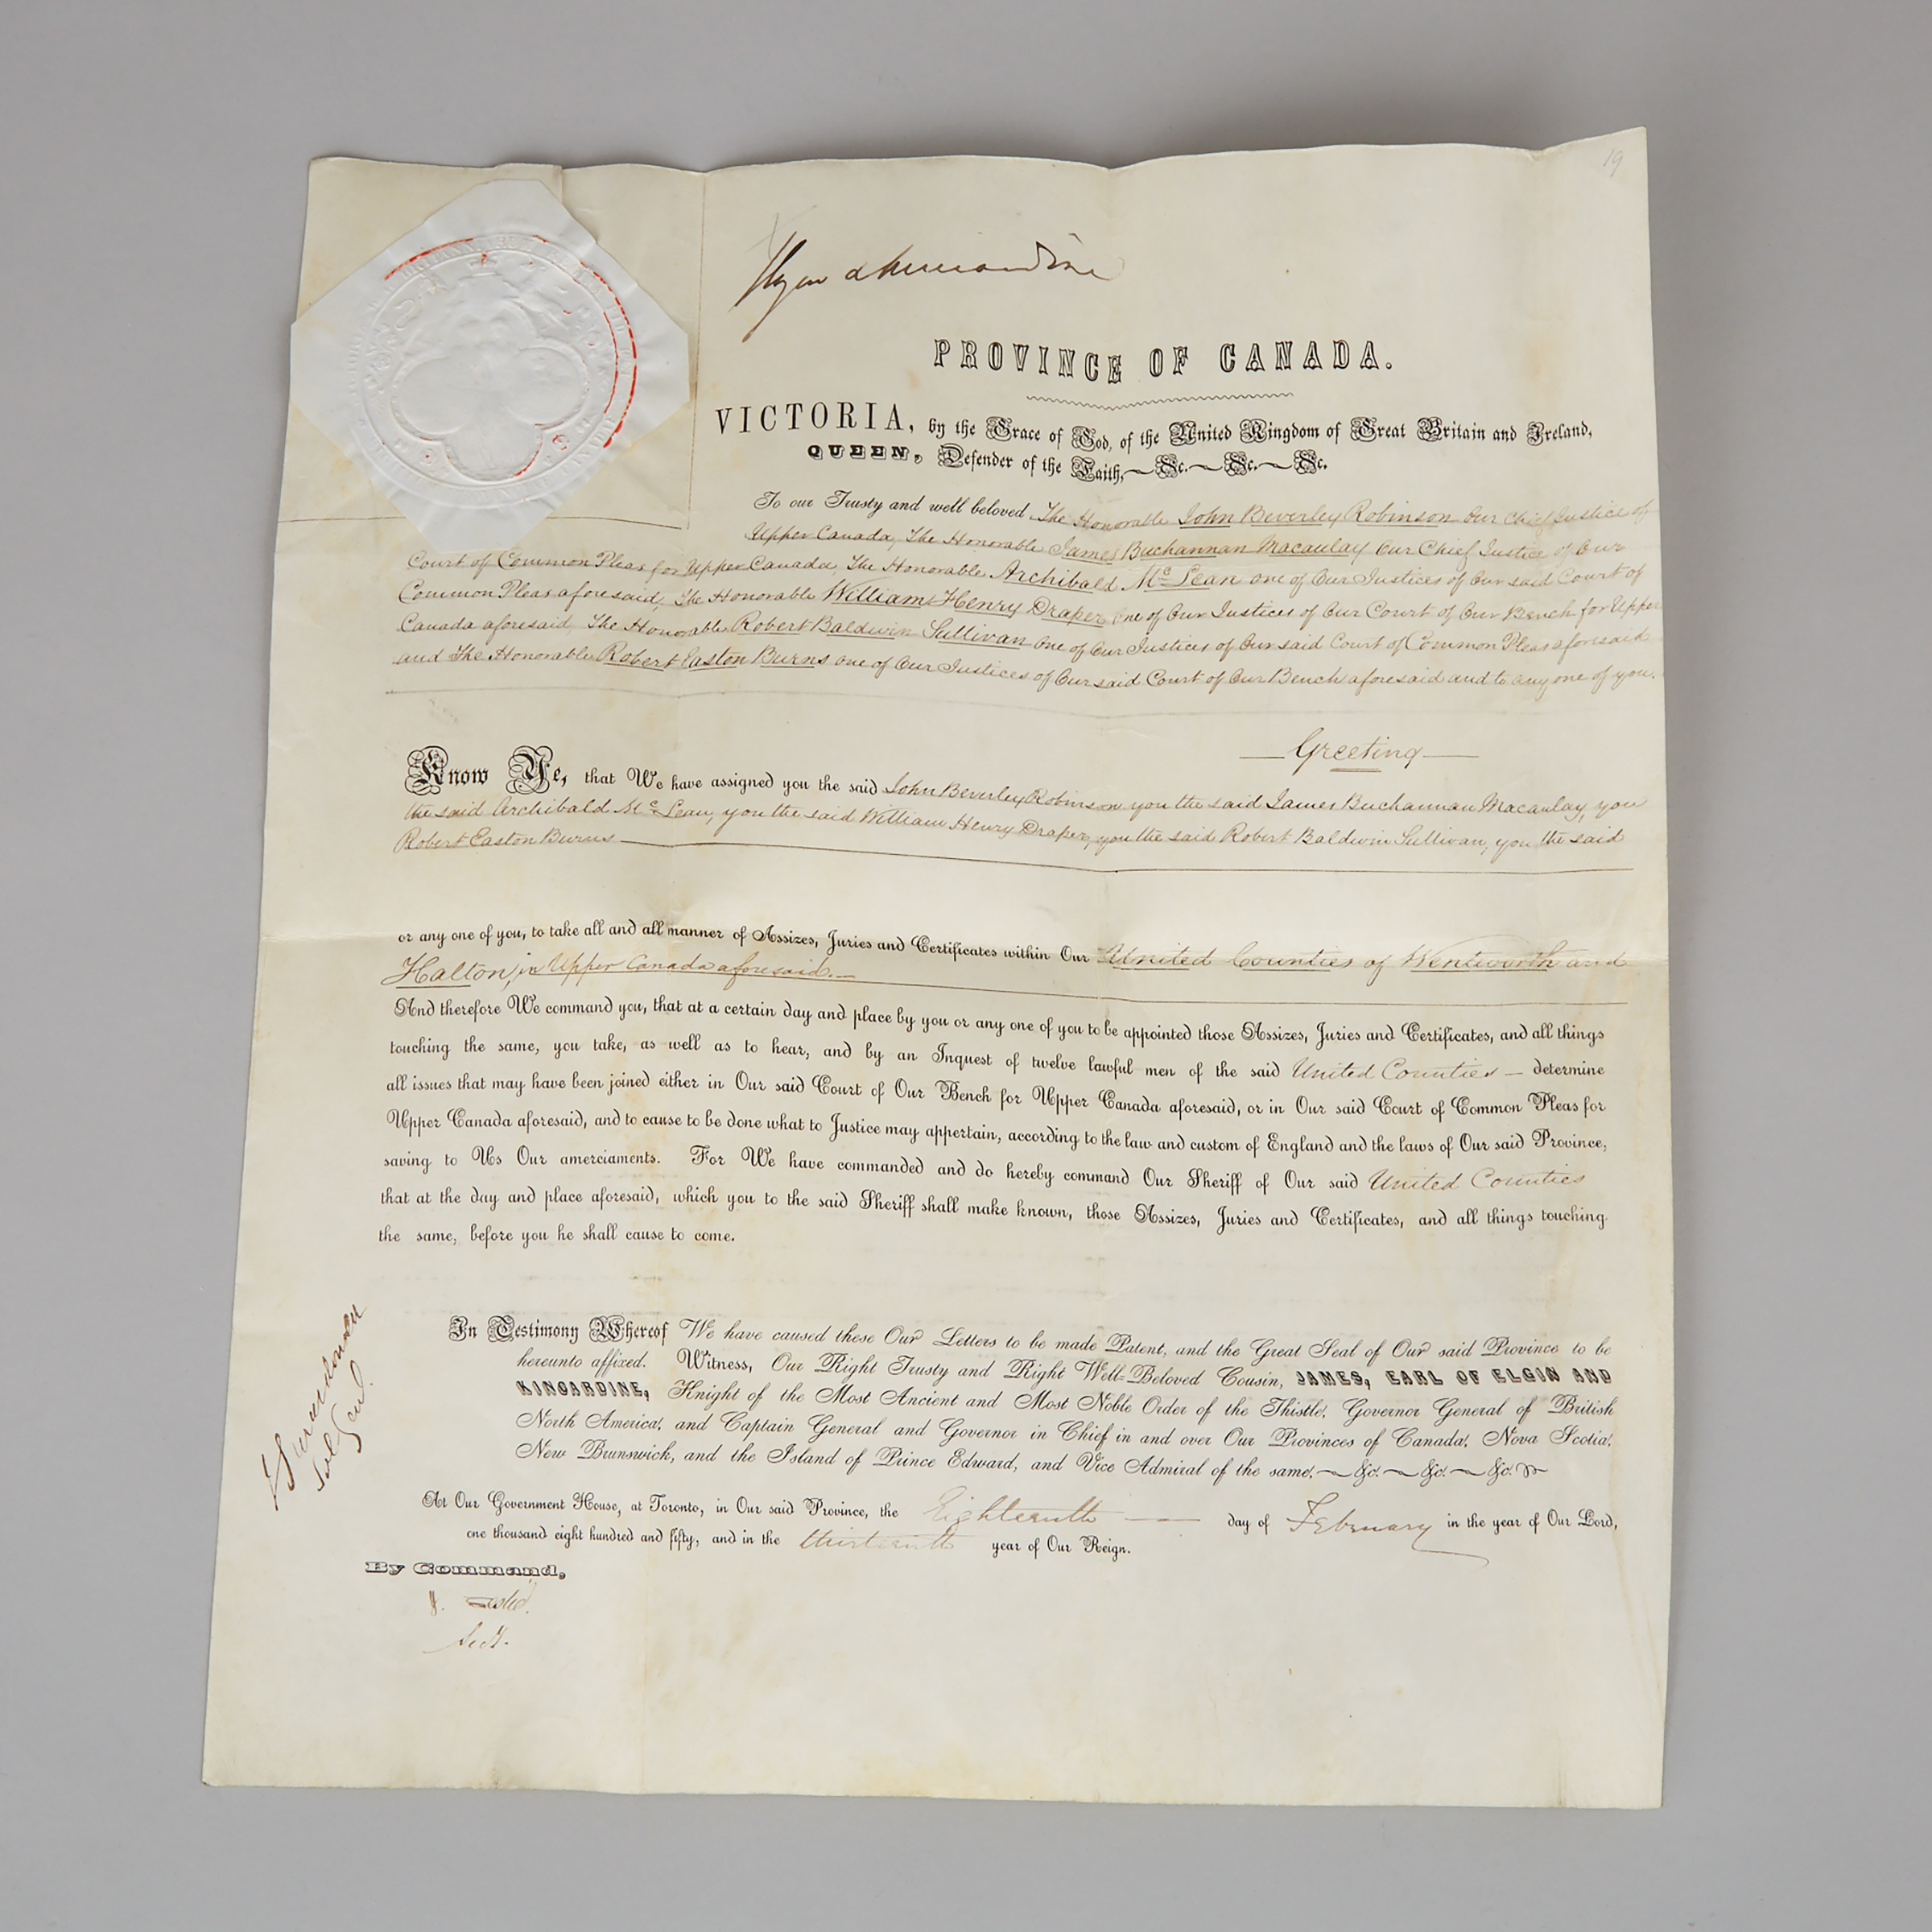 Province of Canada Letters Patent, February 18th, 1850